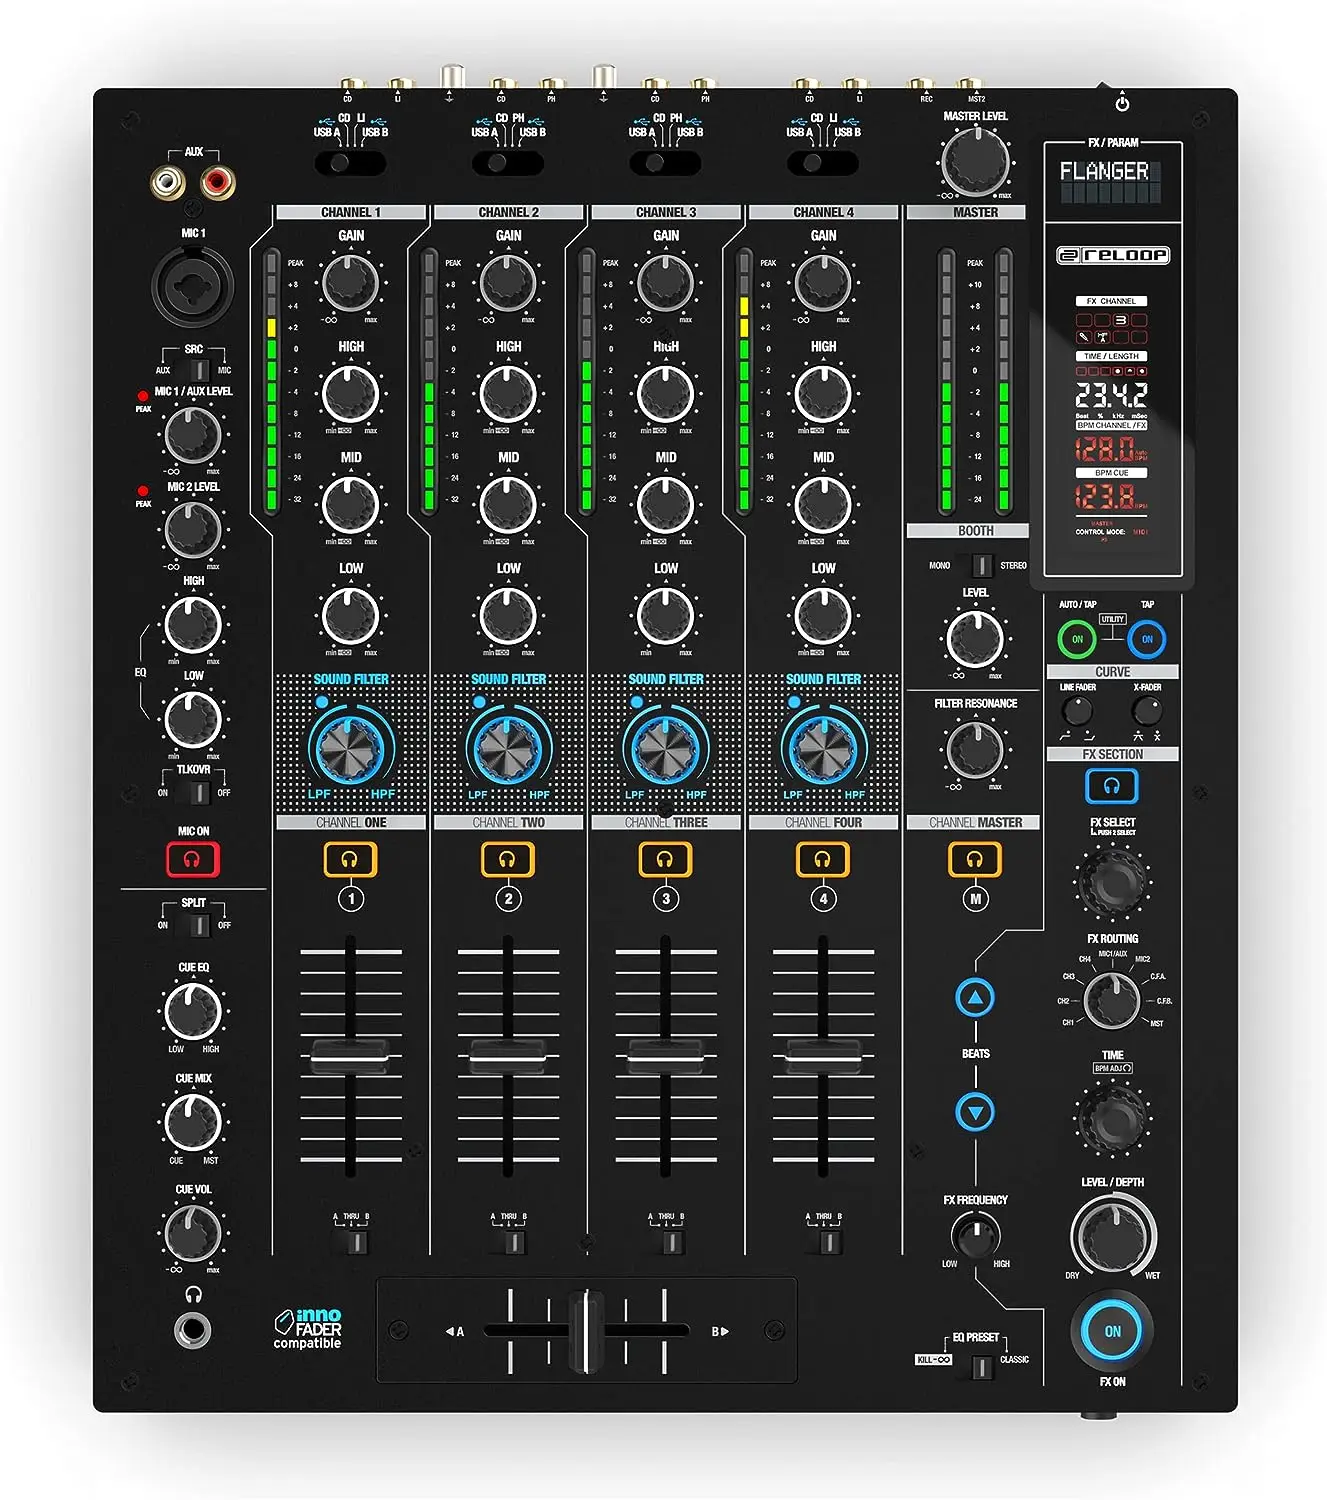 

100% OFFICIAL Reloop RMX-95 4+1-channel DVS Performance DJ Mixer with Neural Mix B-stock